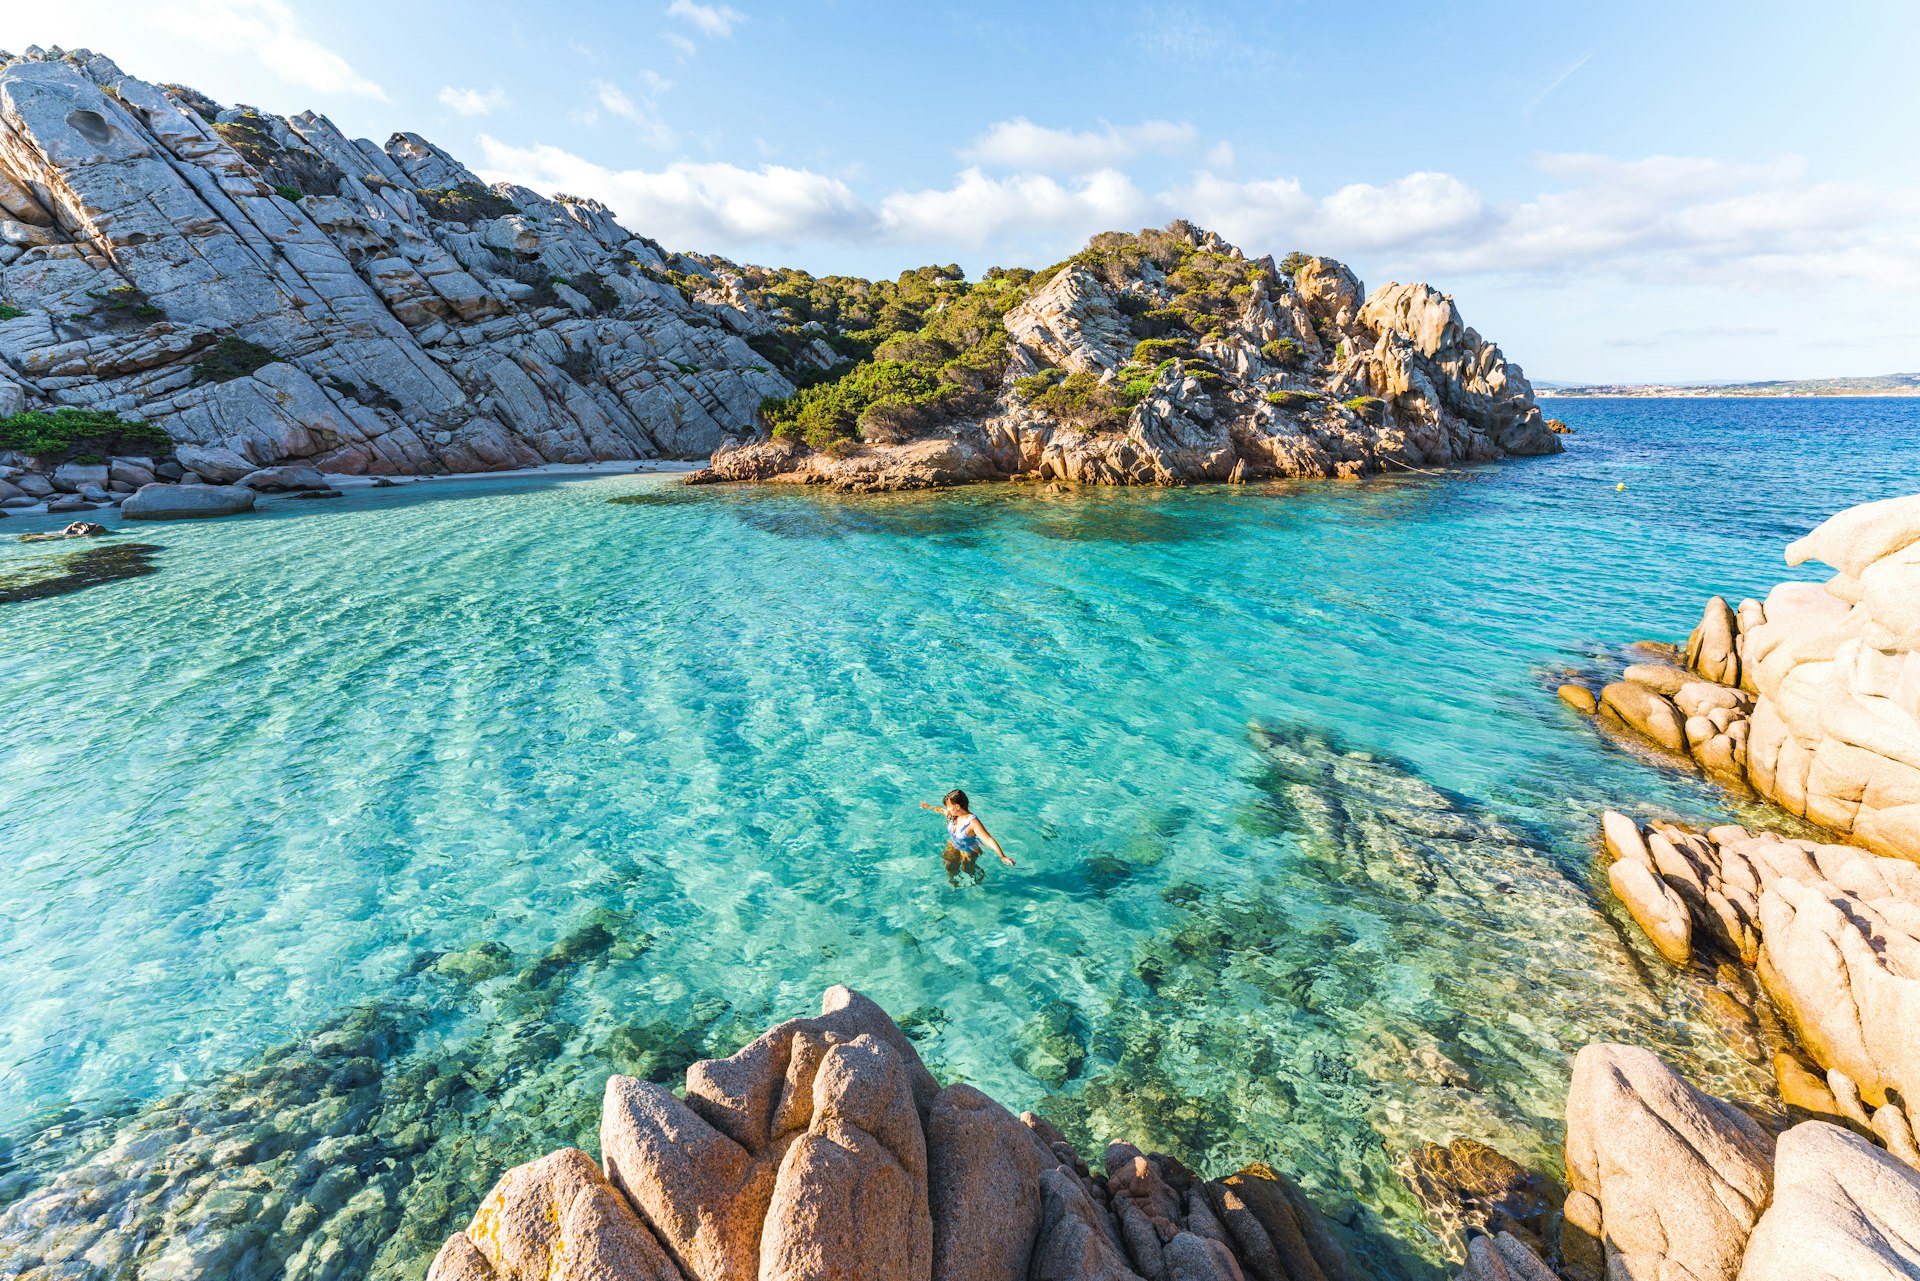 A person swims in the water in a secluded cove at the beach of Cala Napoletana, Sardinia. 